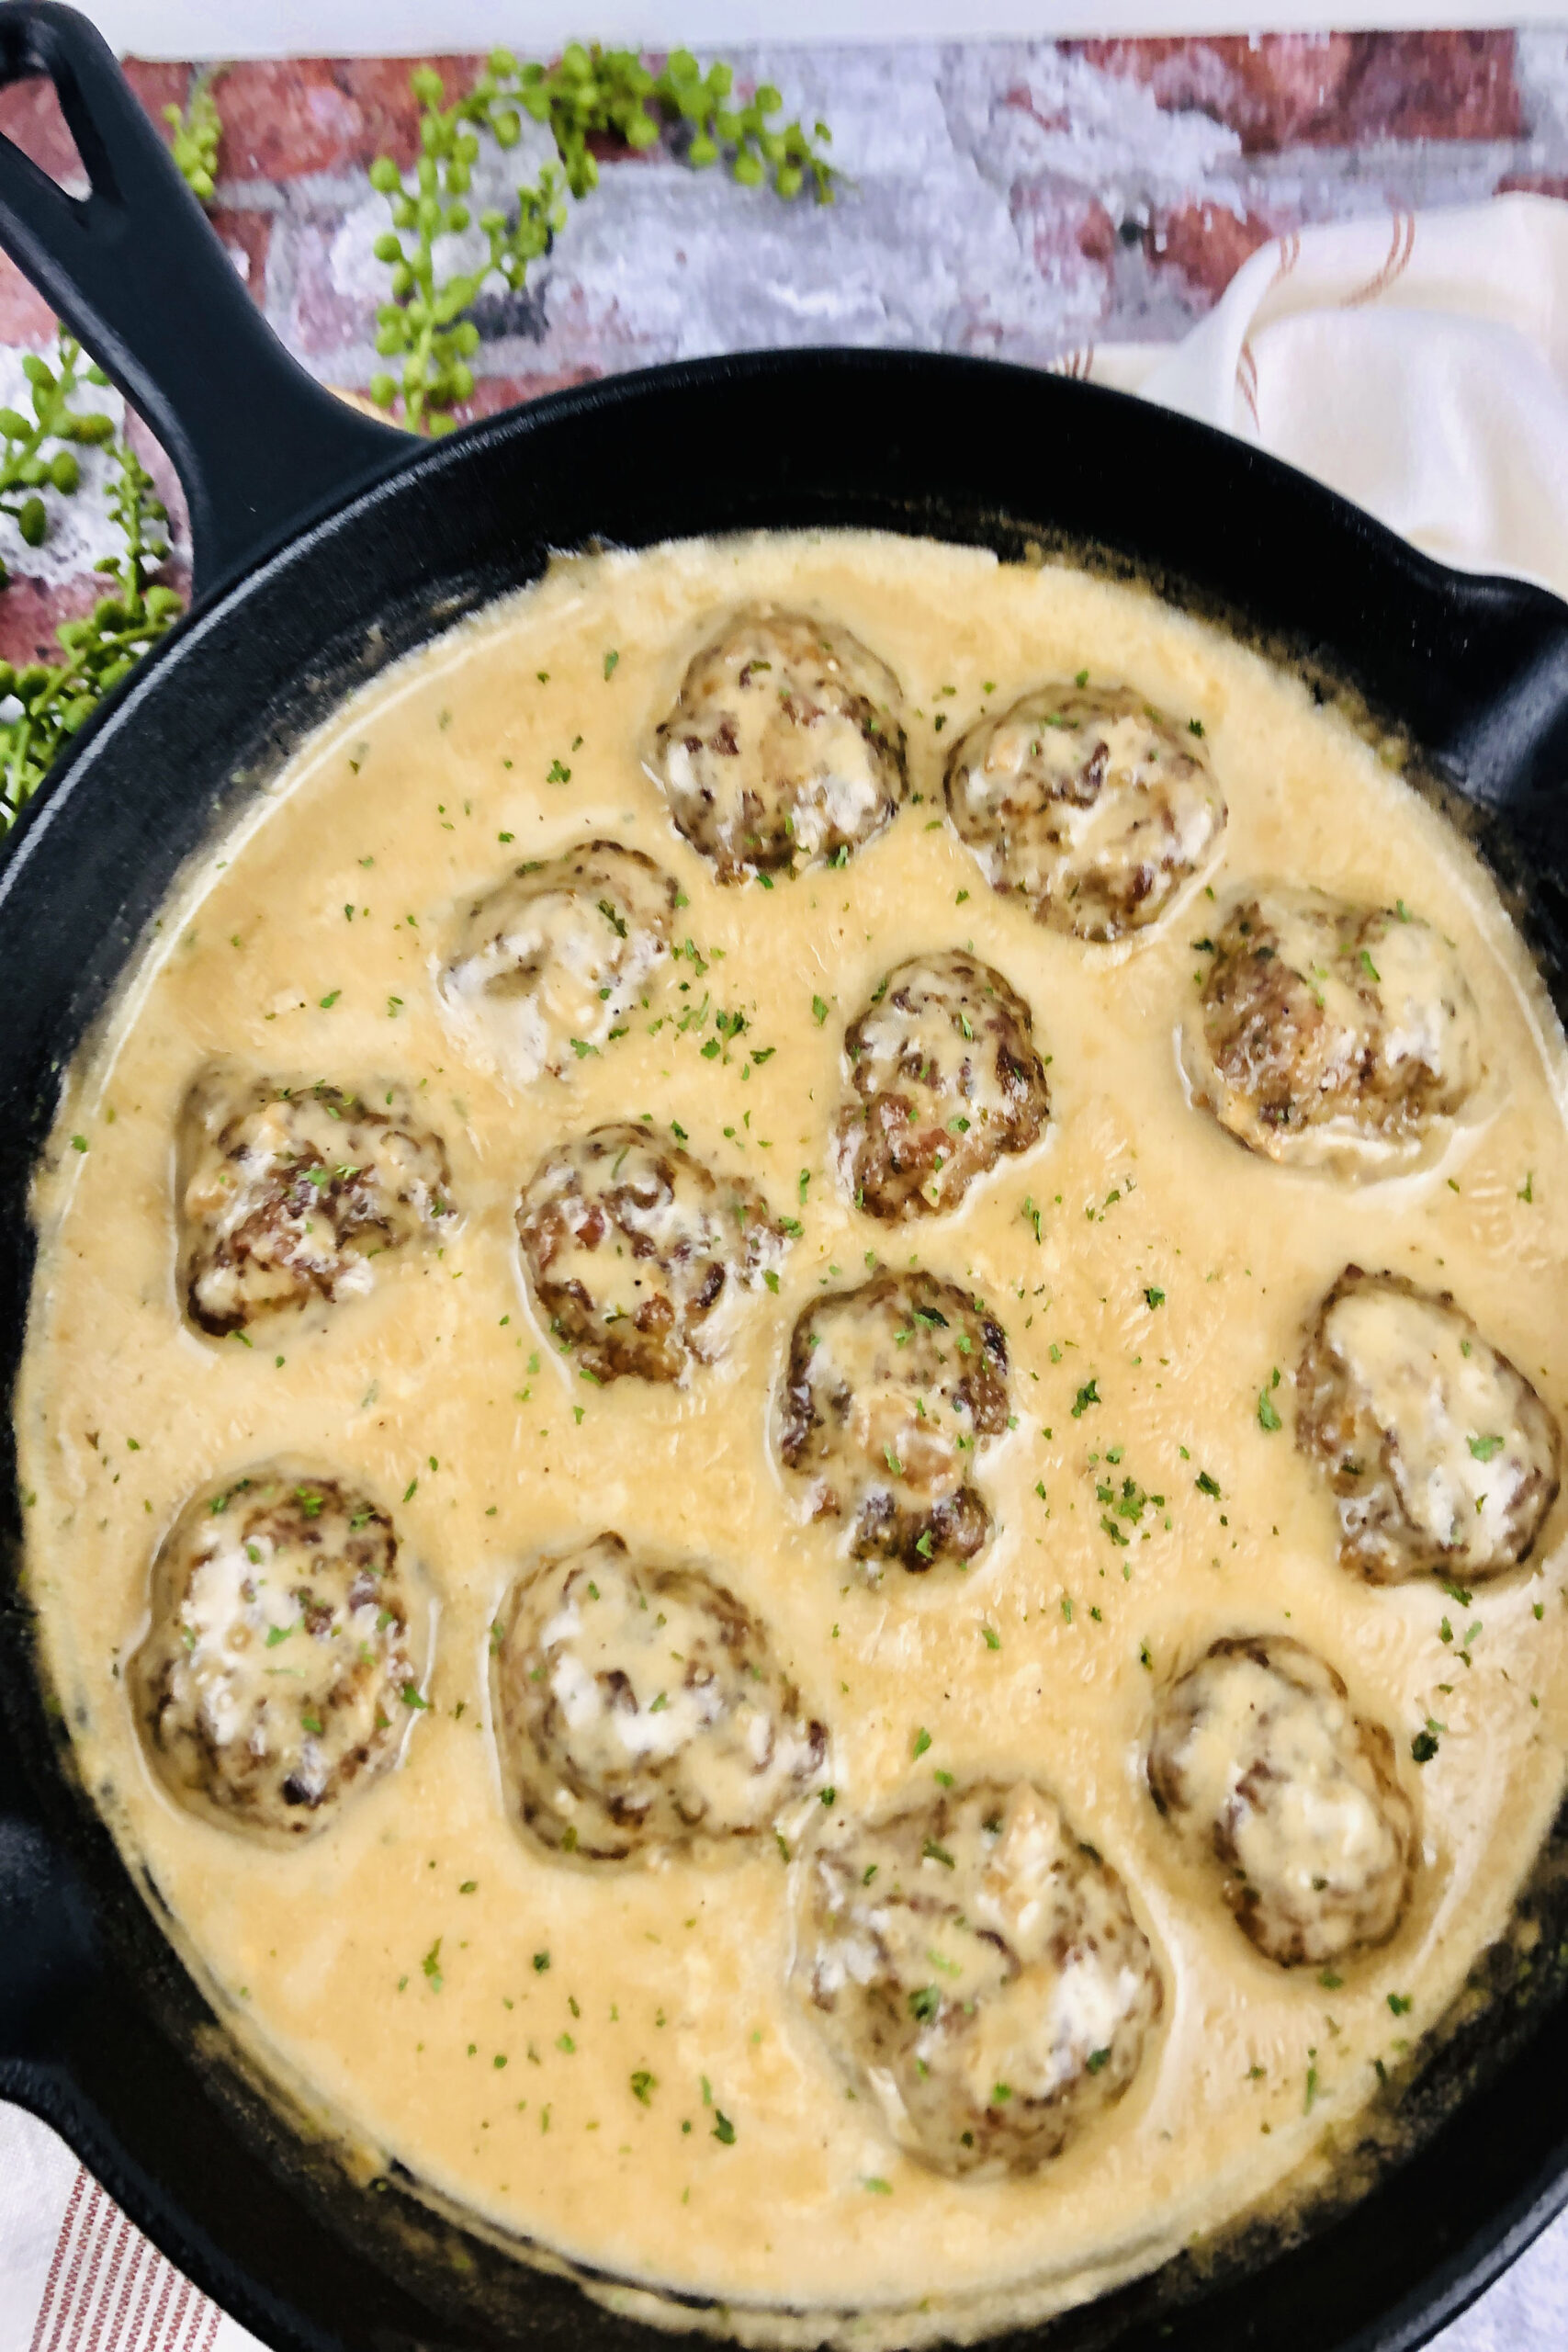 A pan filled with the Swedish meatballs.